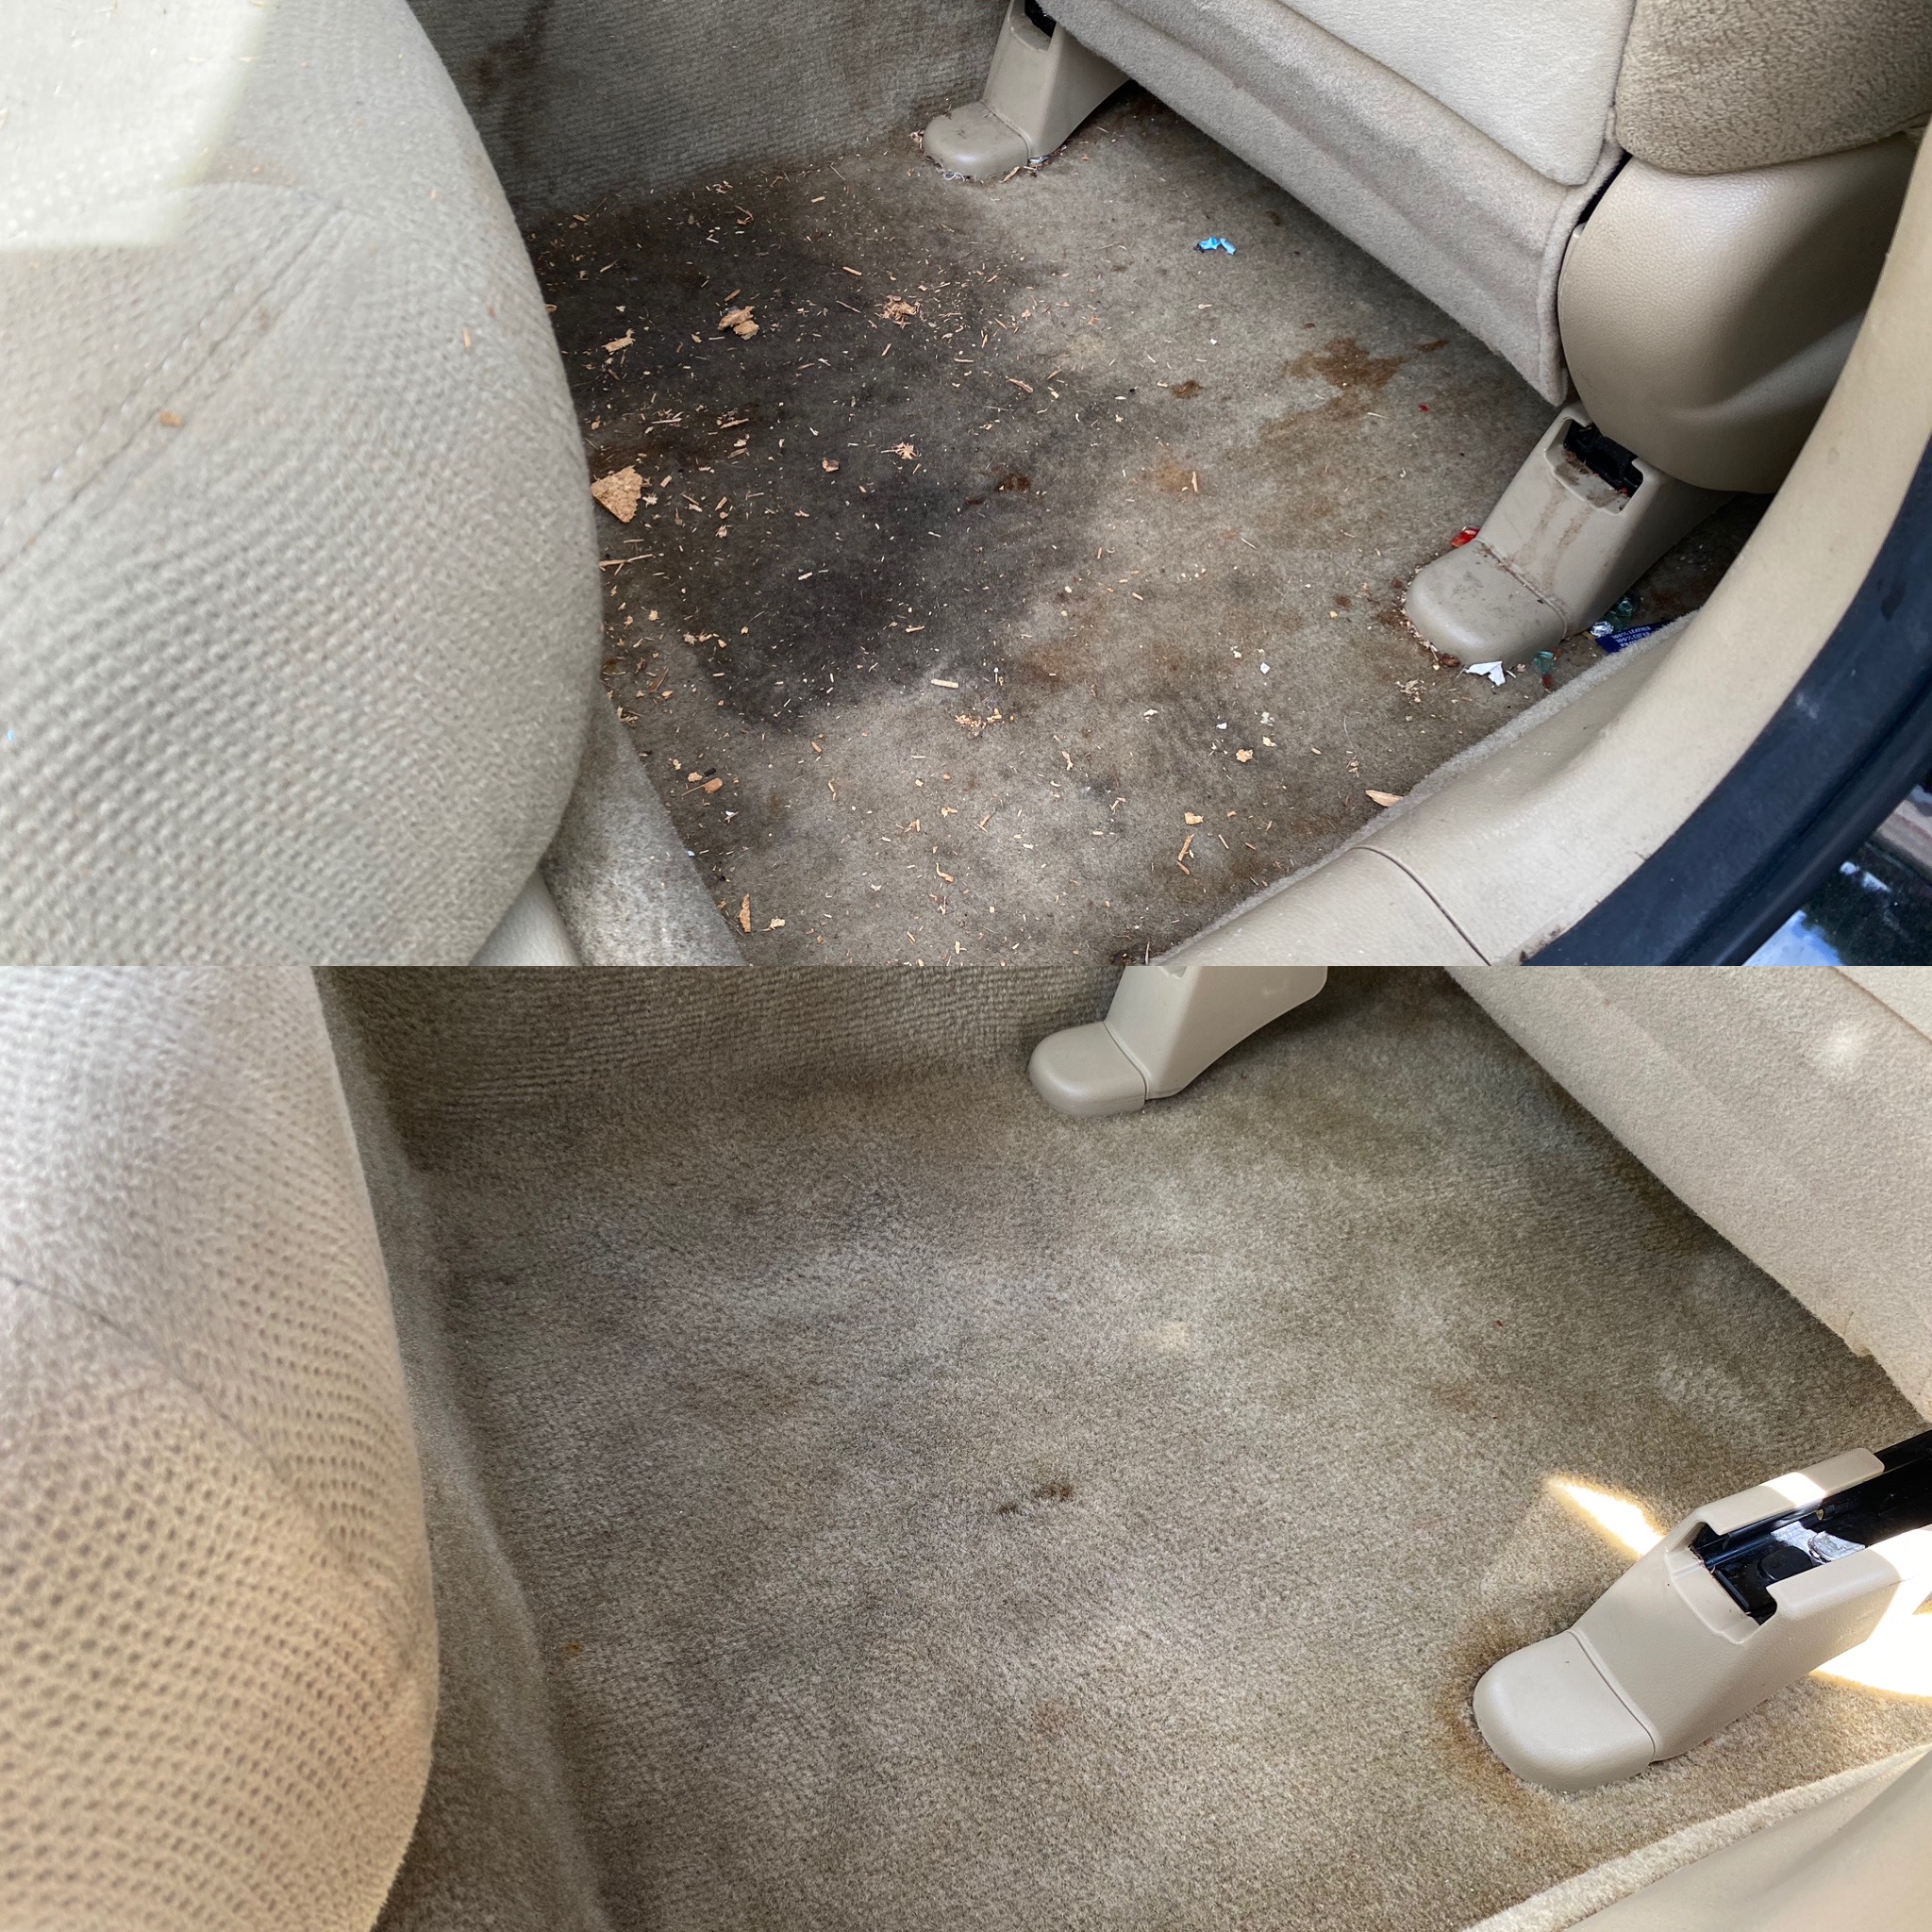 Page 2  79,000+ Car Cleaning Interior Pictures